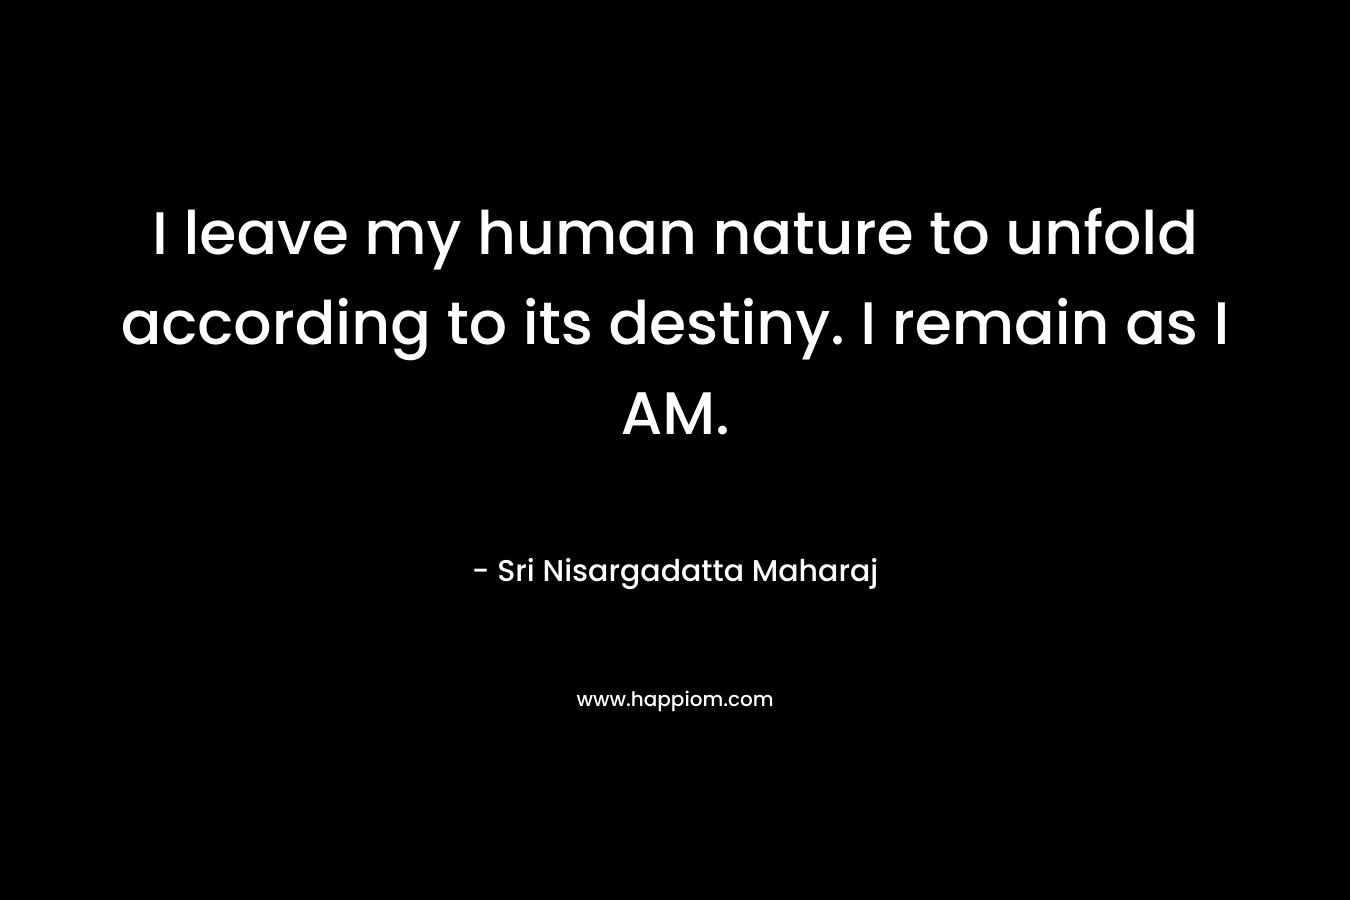 I leave my human nature to unfold according to its destiny. I remain as I AM.